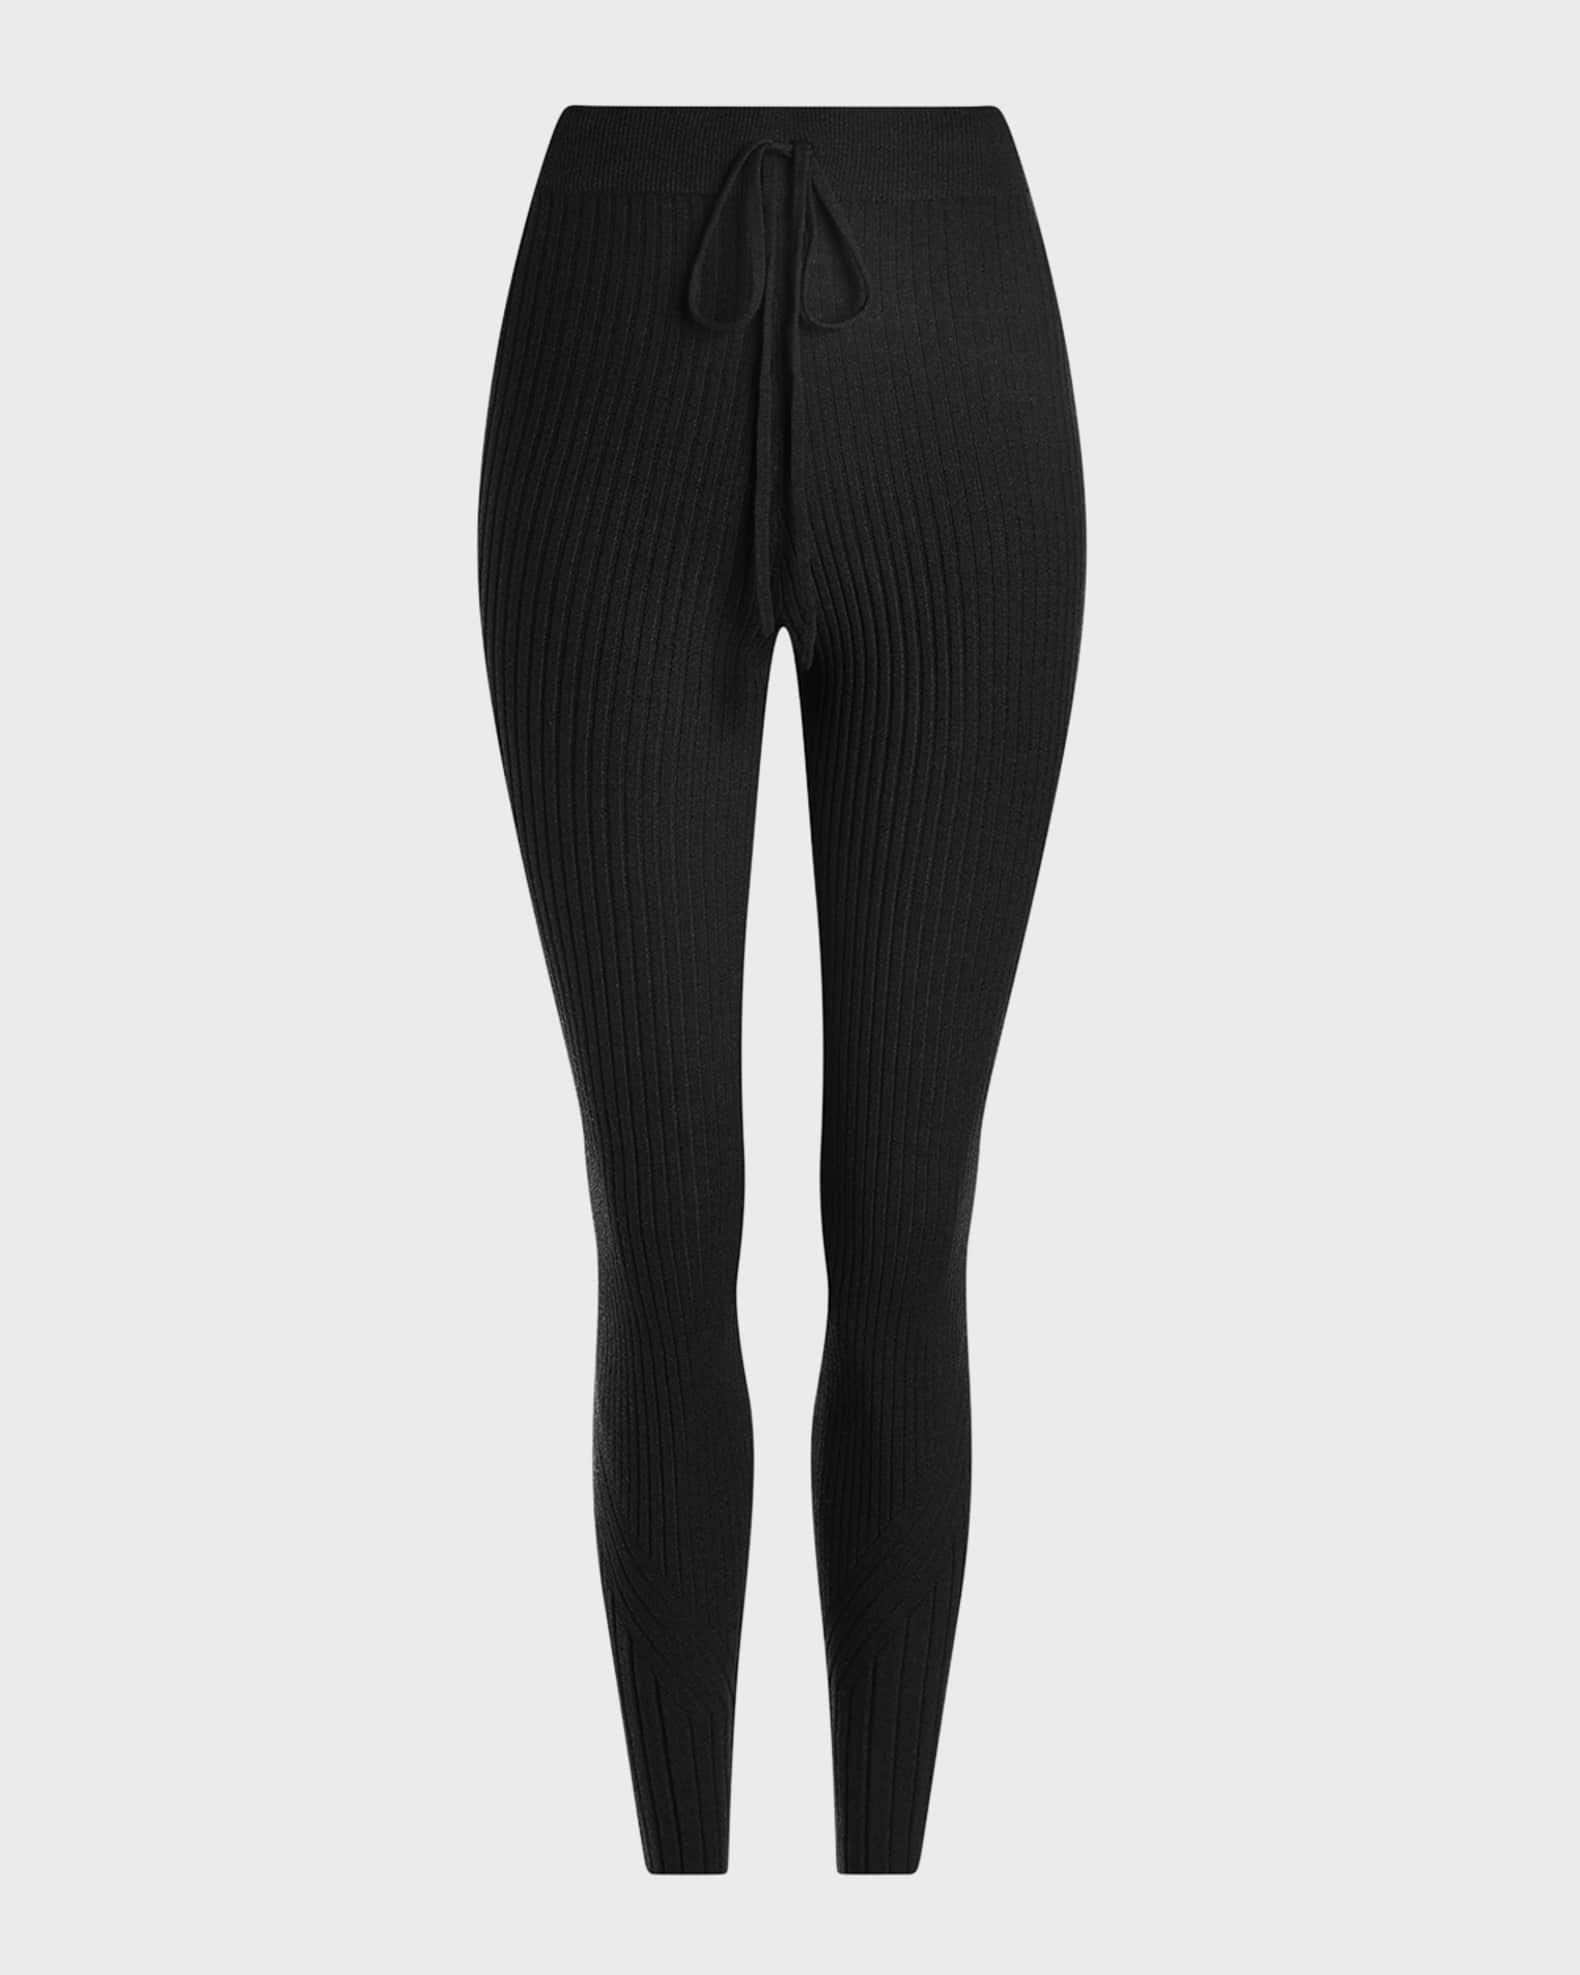 Angie Black Leggings – The Rooted Shoppe